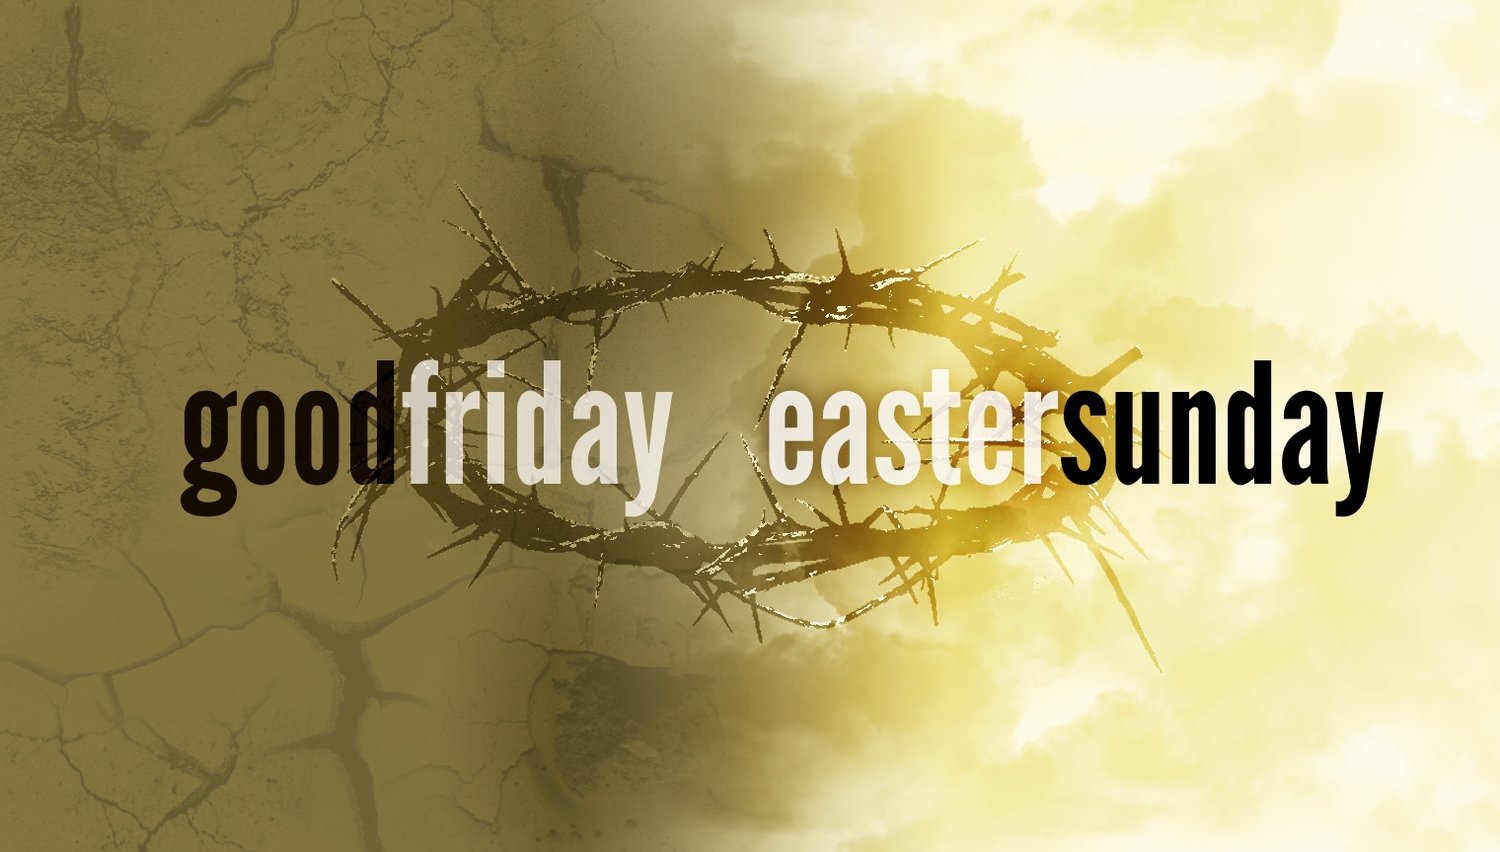 Good Friday Pictures HD Wallpapers 2019 - Good Friday New Wallpapers HD